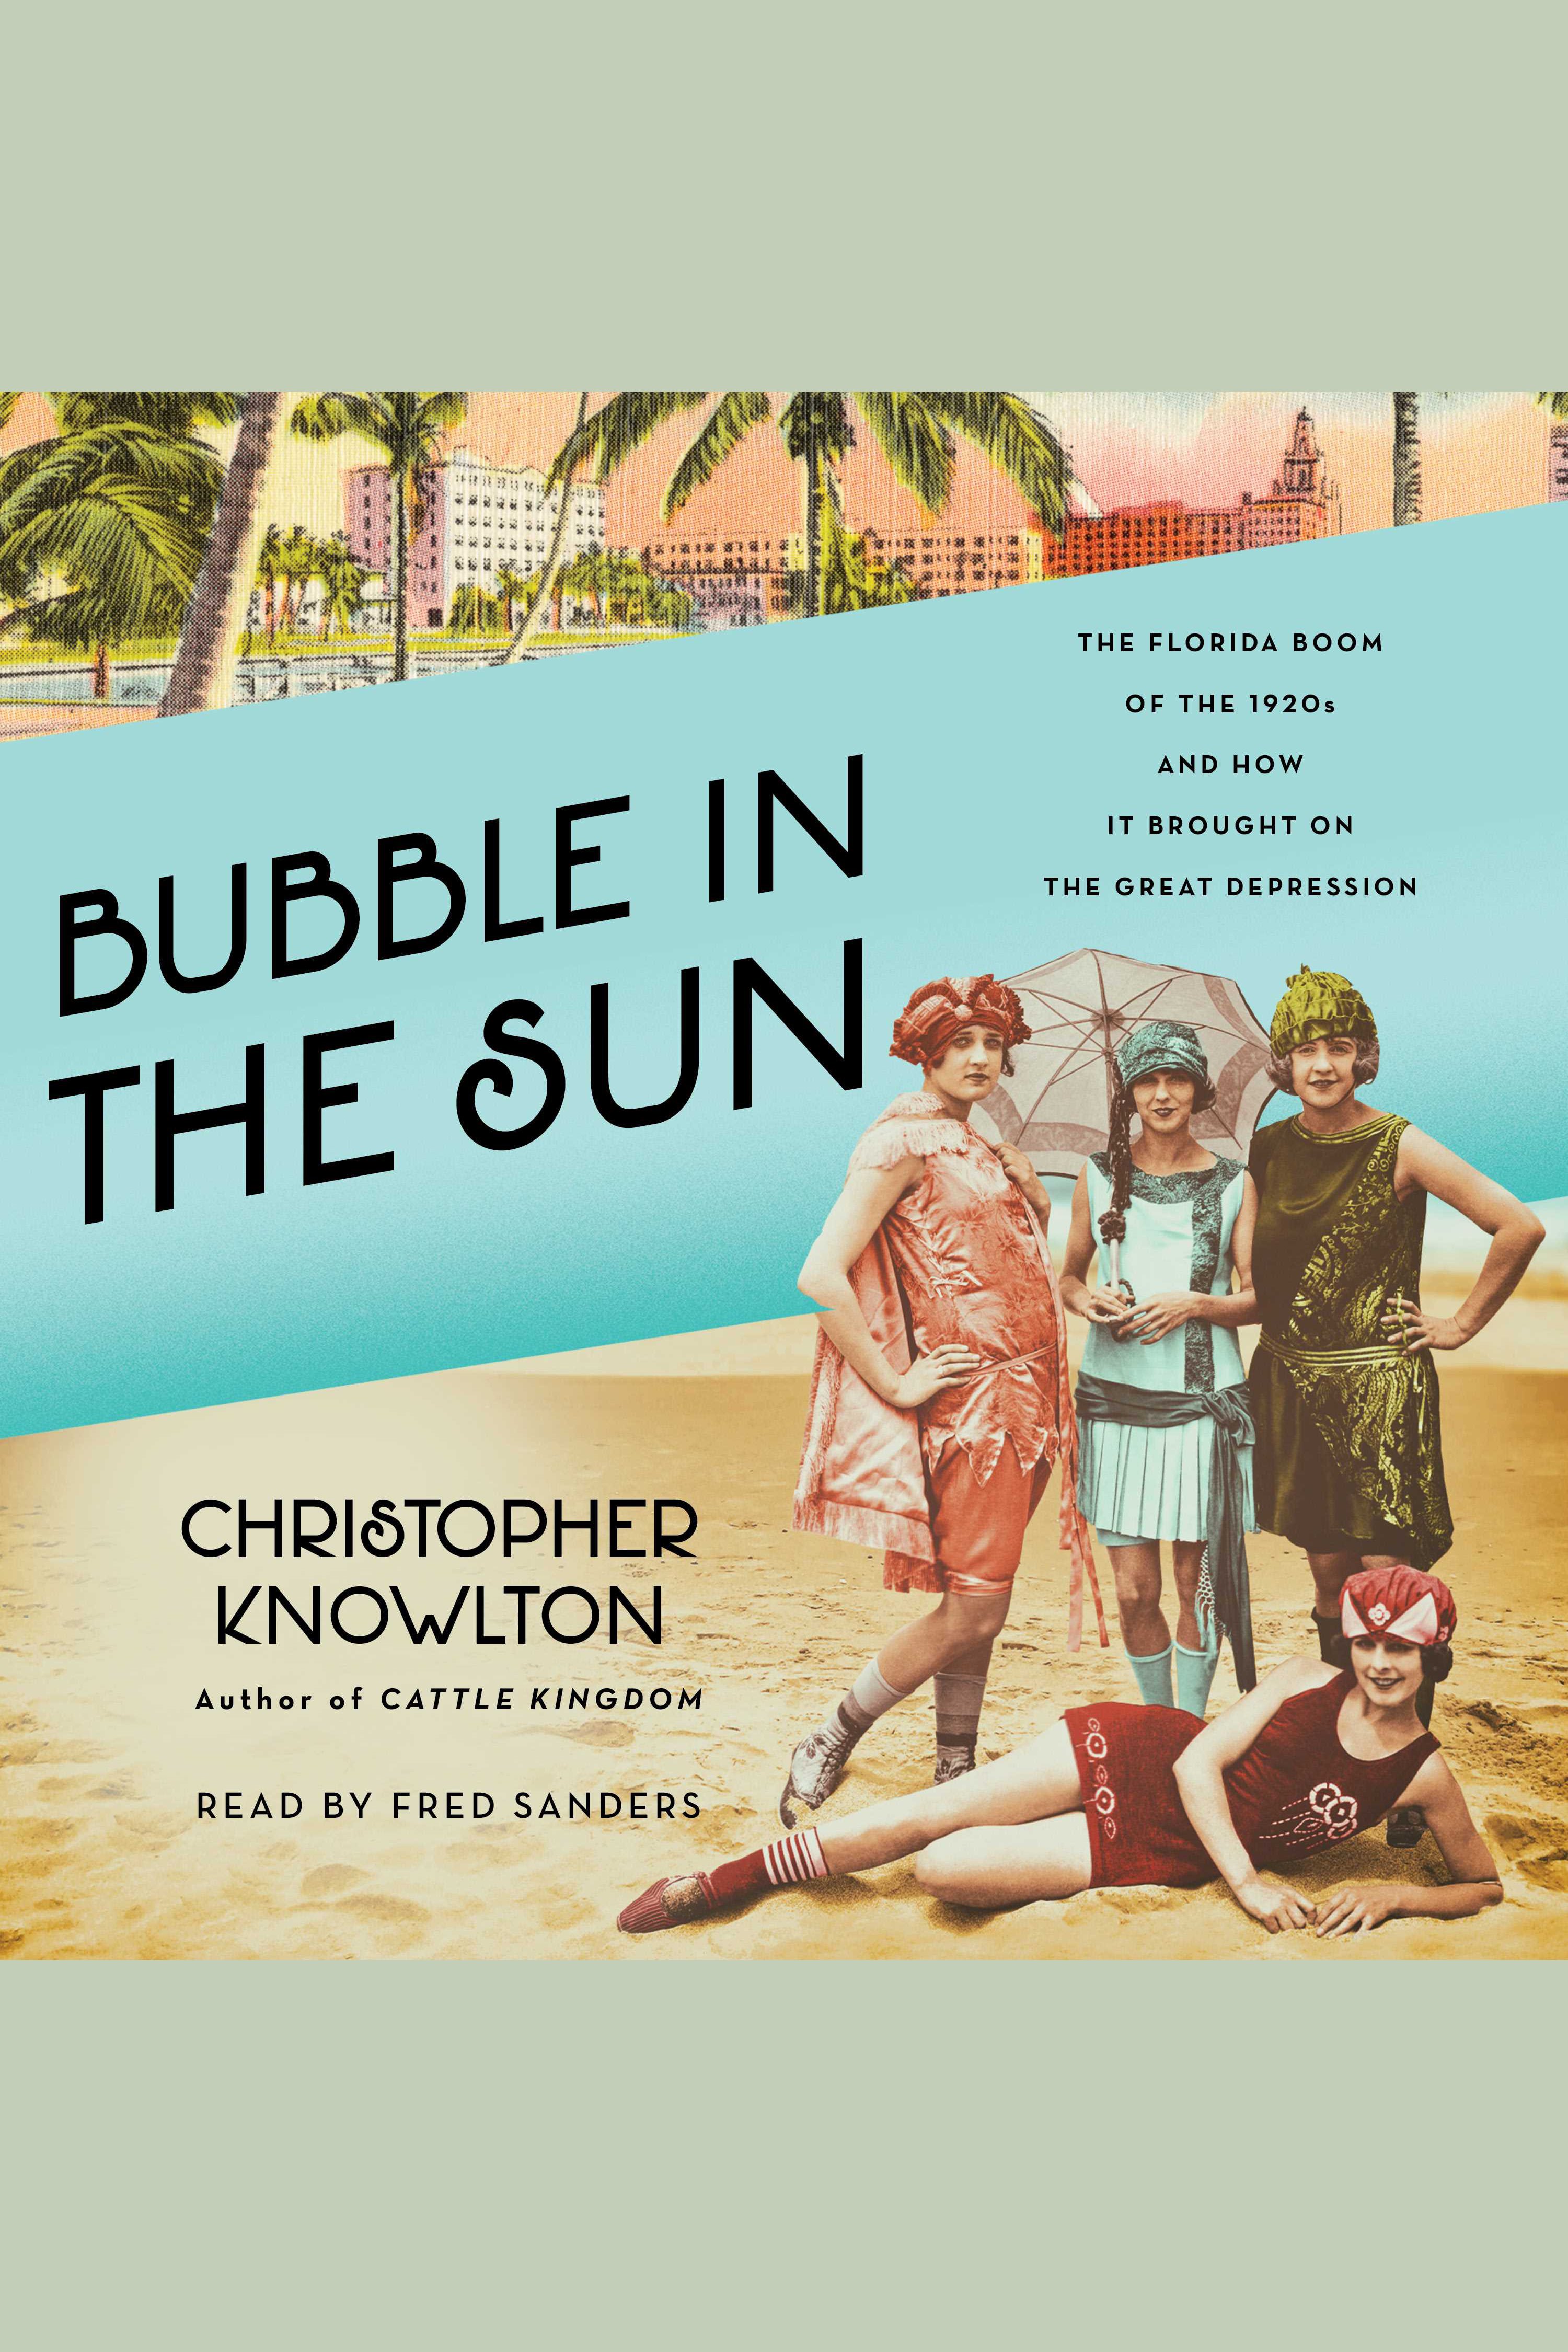 Image de couverture de Bubble in the Sun [electronic resource] : The Florida Boom of the 1920s and How It Brought on the Great Depression